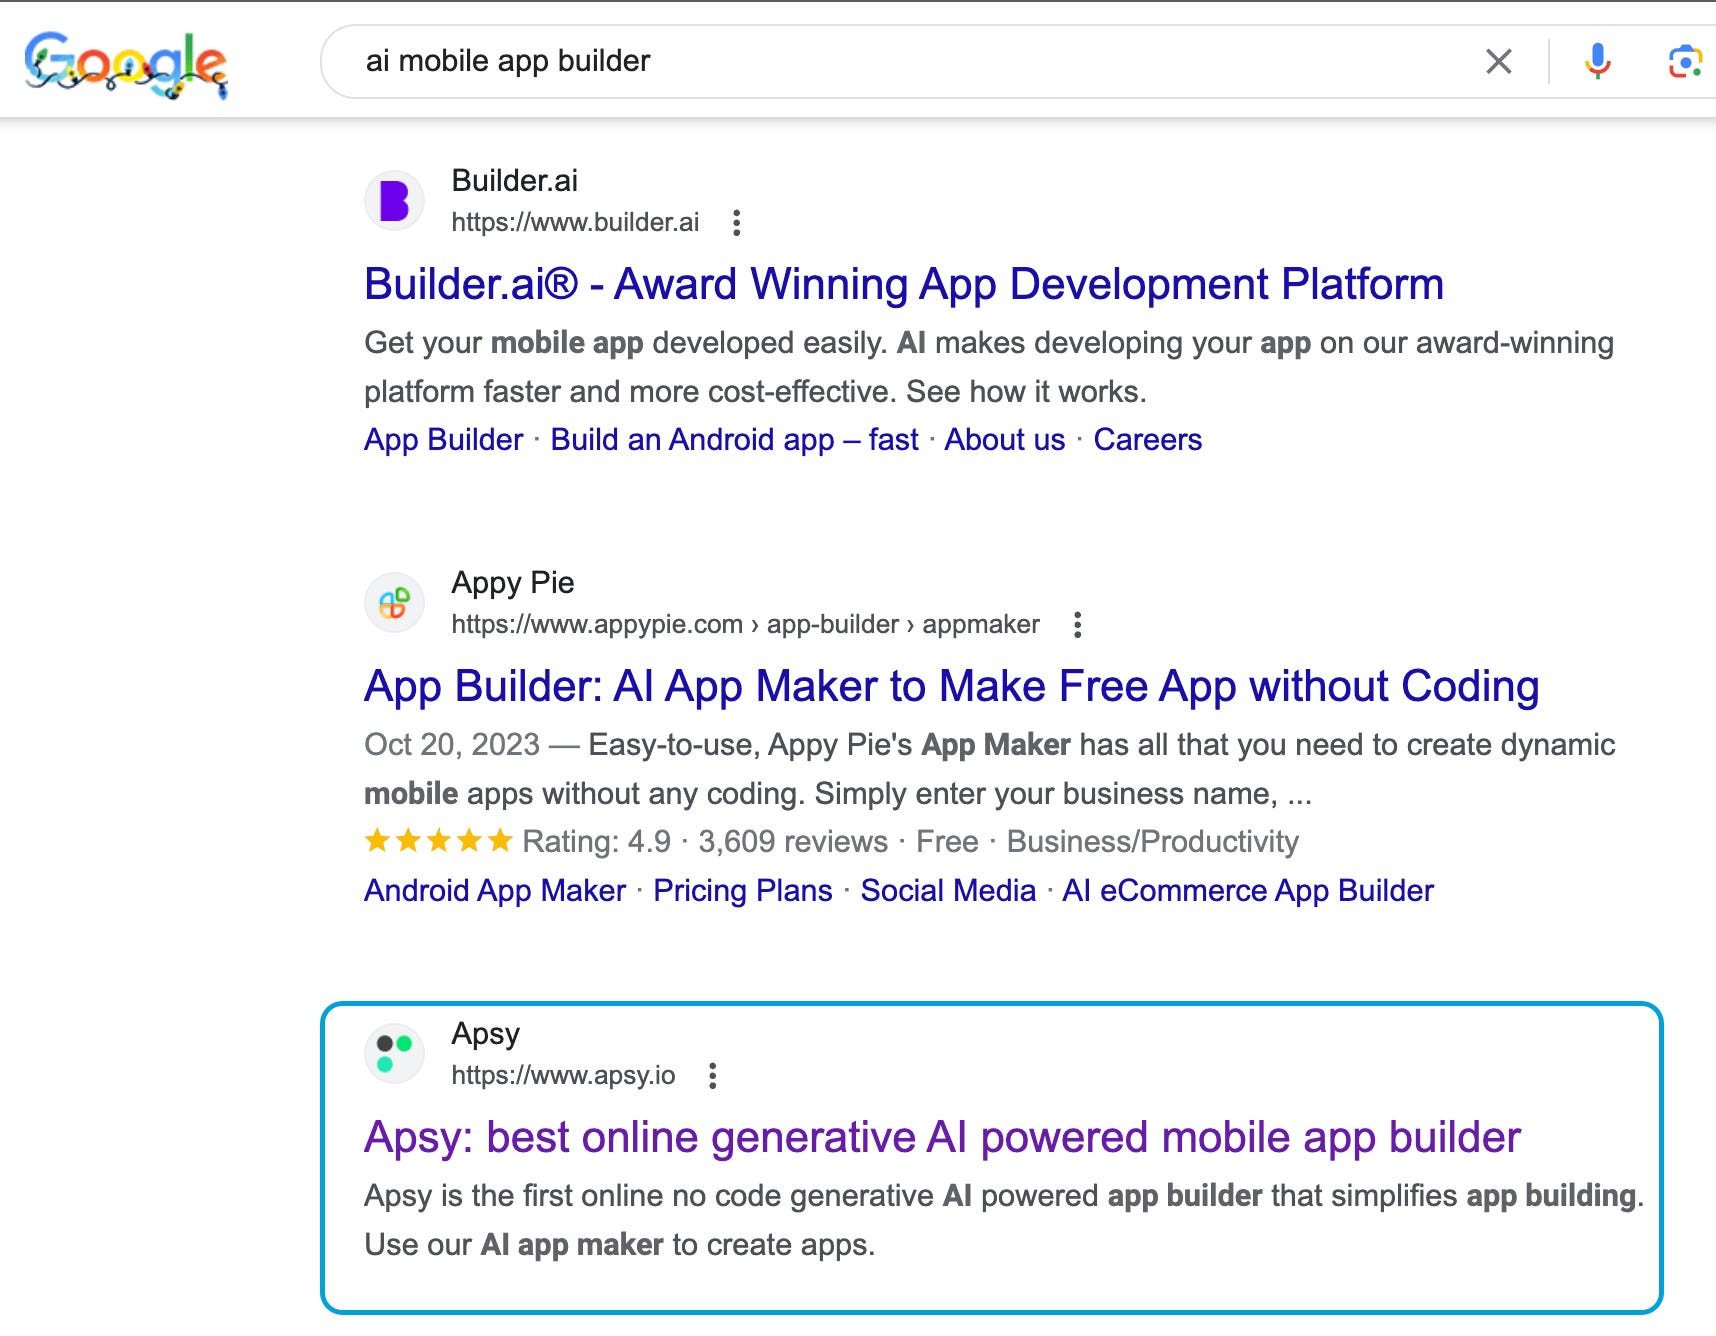 App Builder: AI App Maker to Make Free App without Coding